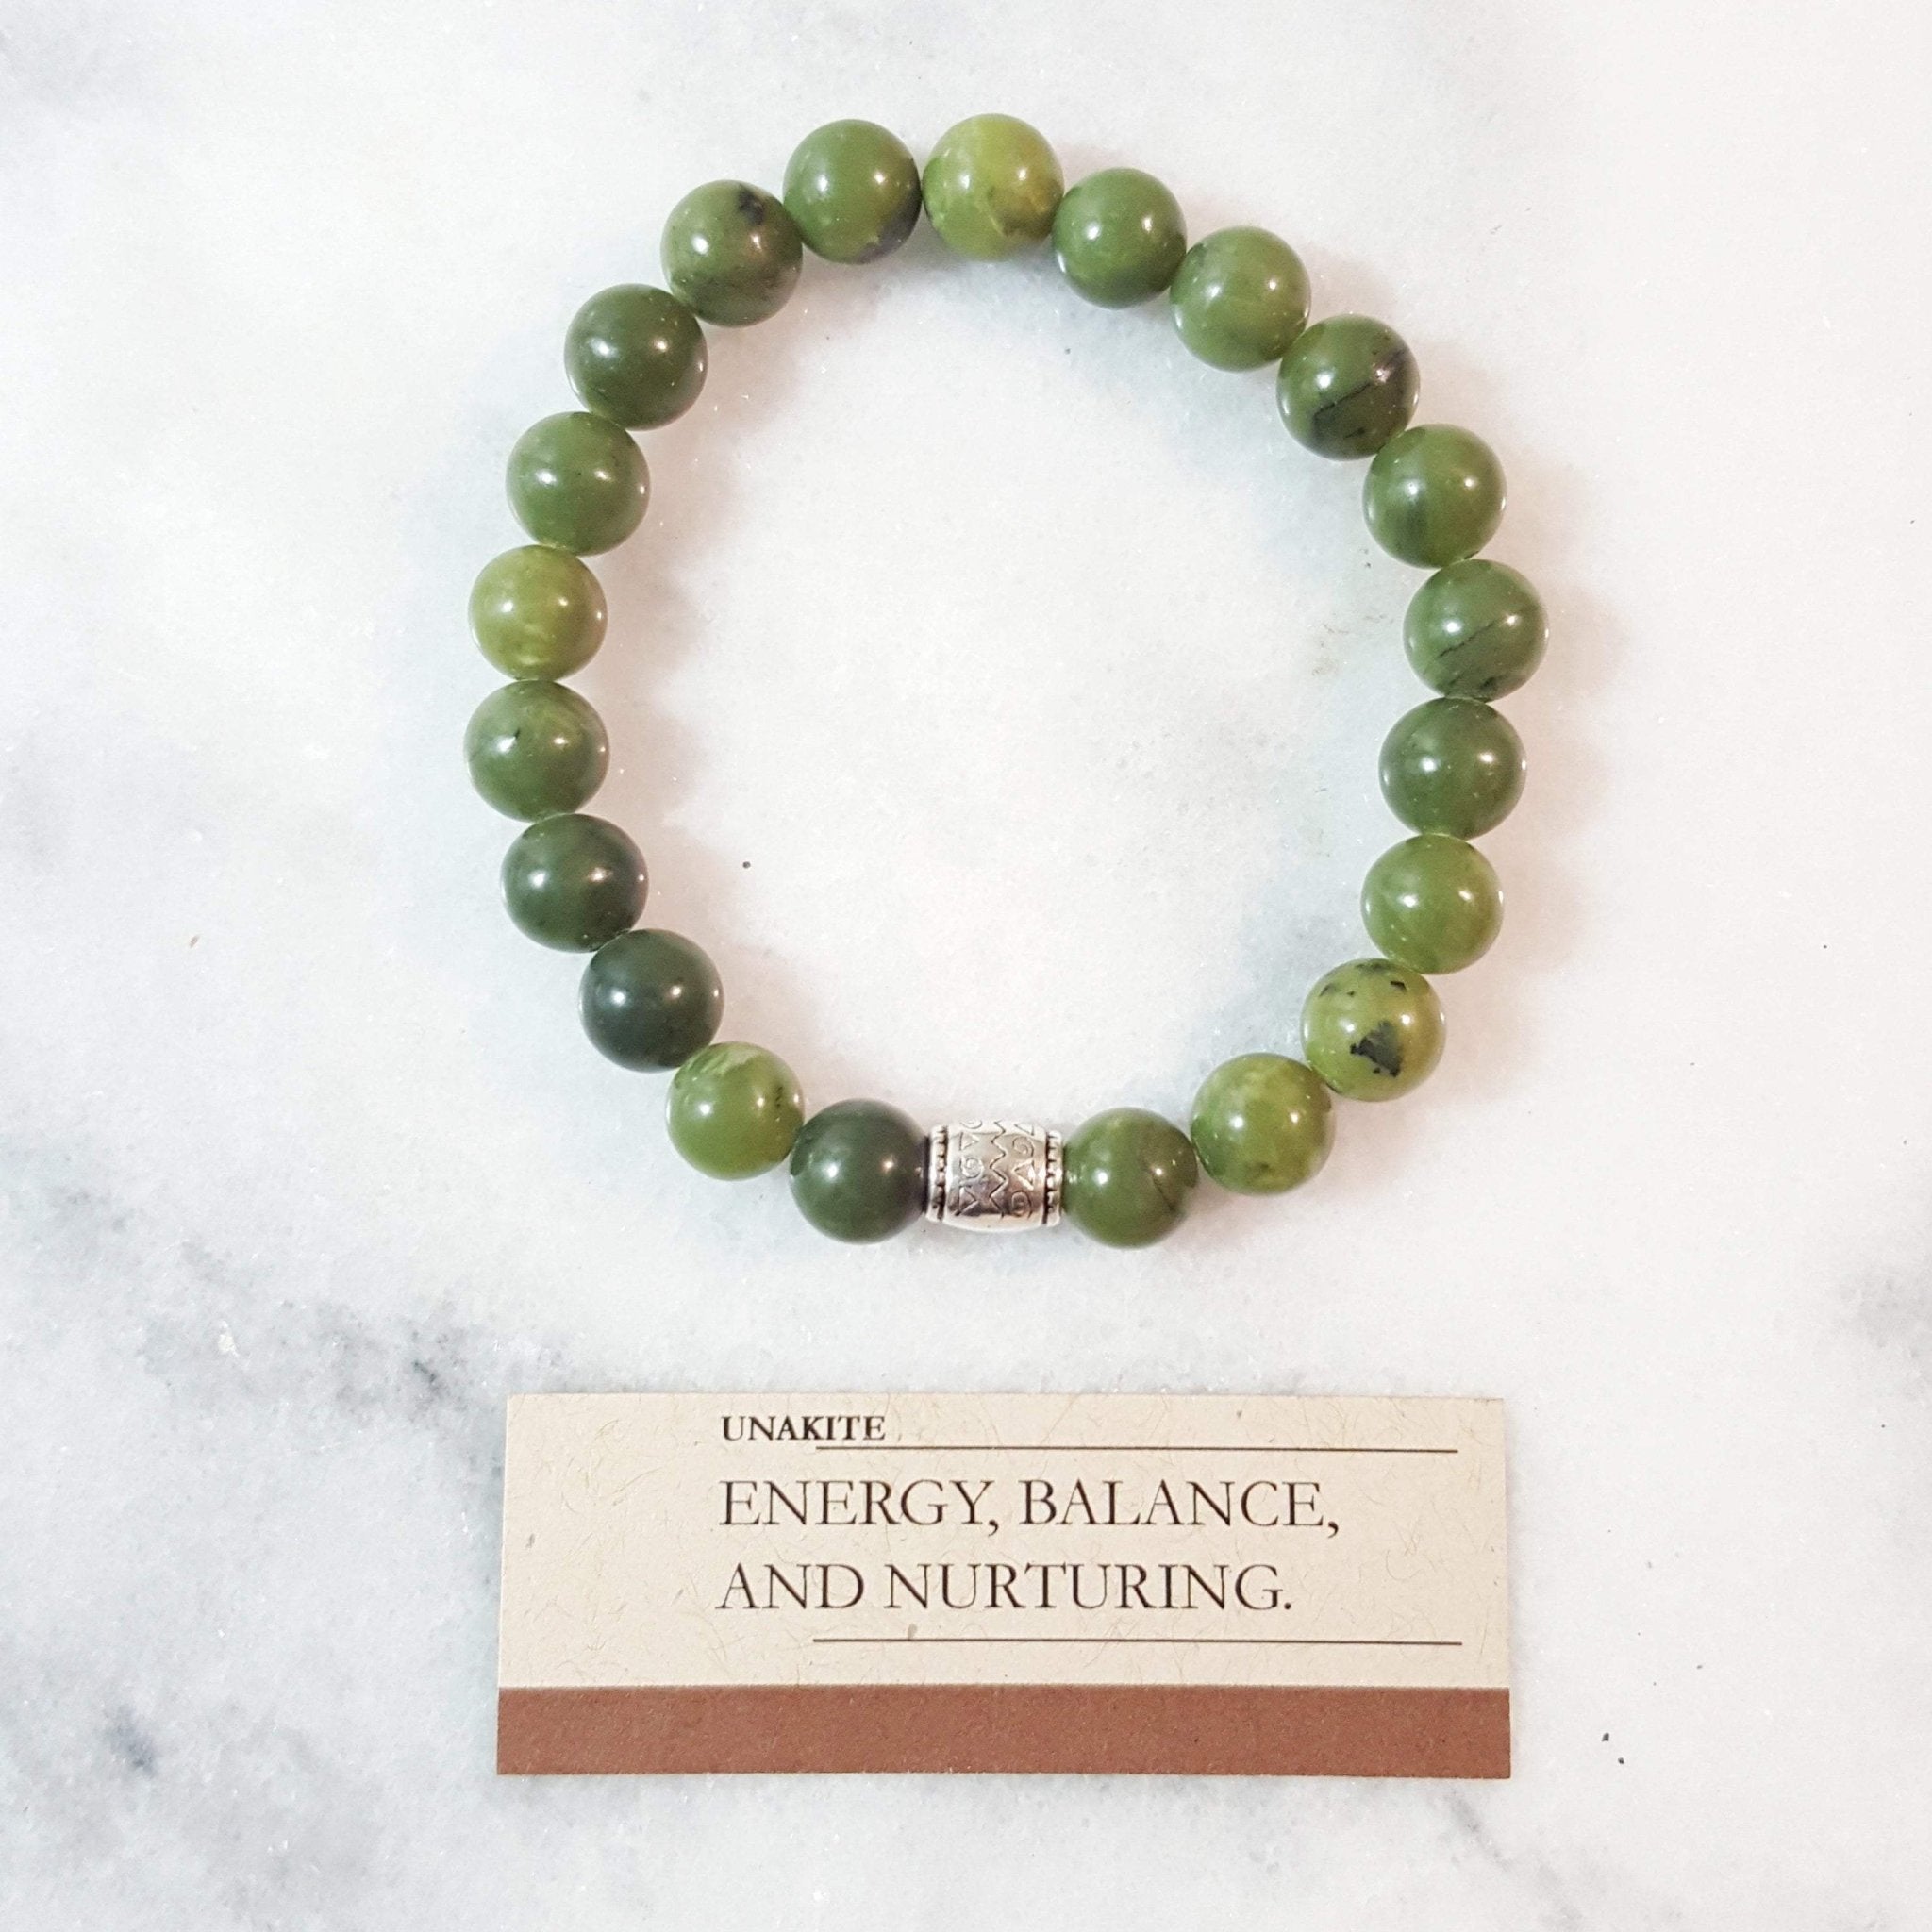 Buy Wholesale 6 Pcs Natural Unakite 6mm 7.5 Crystal Healing Stretch Bracelet  Online in India - Etsy